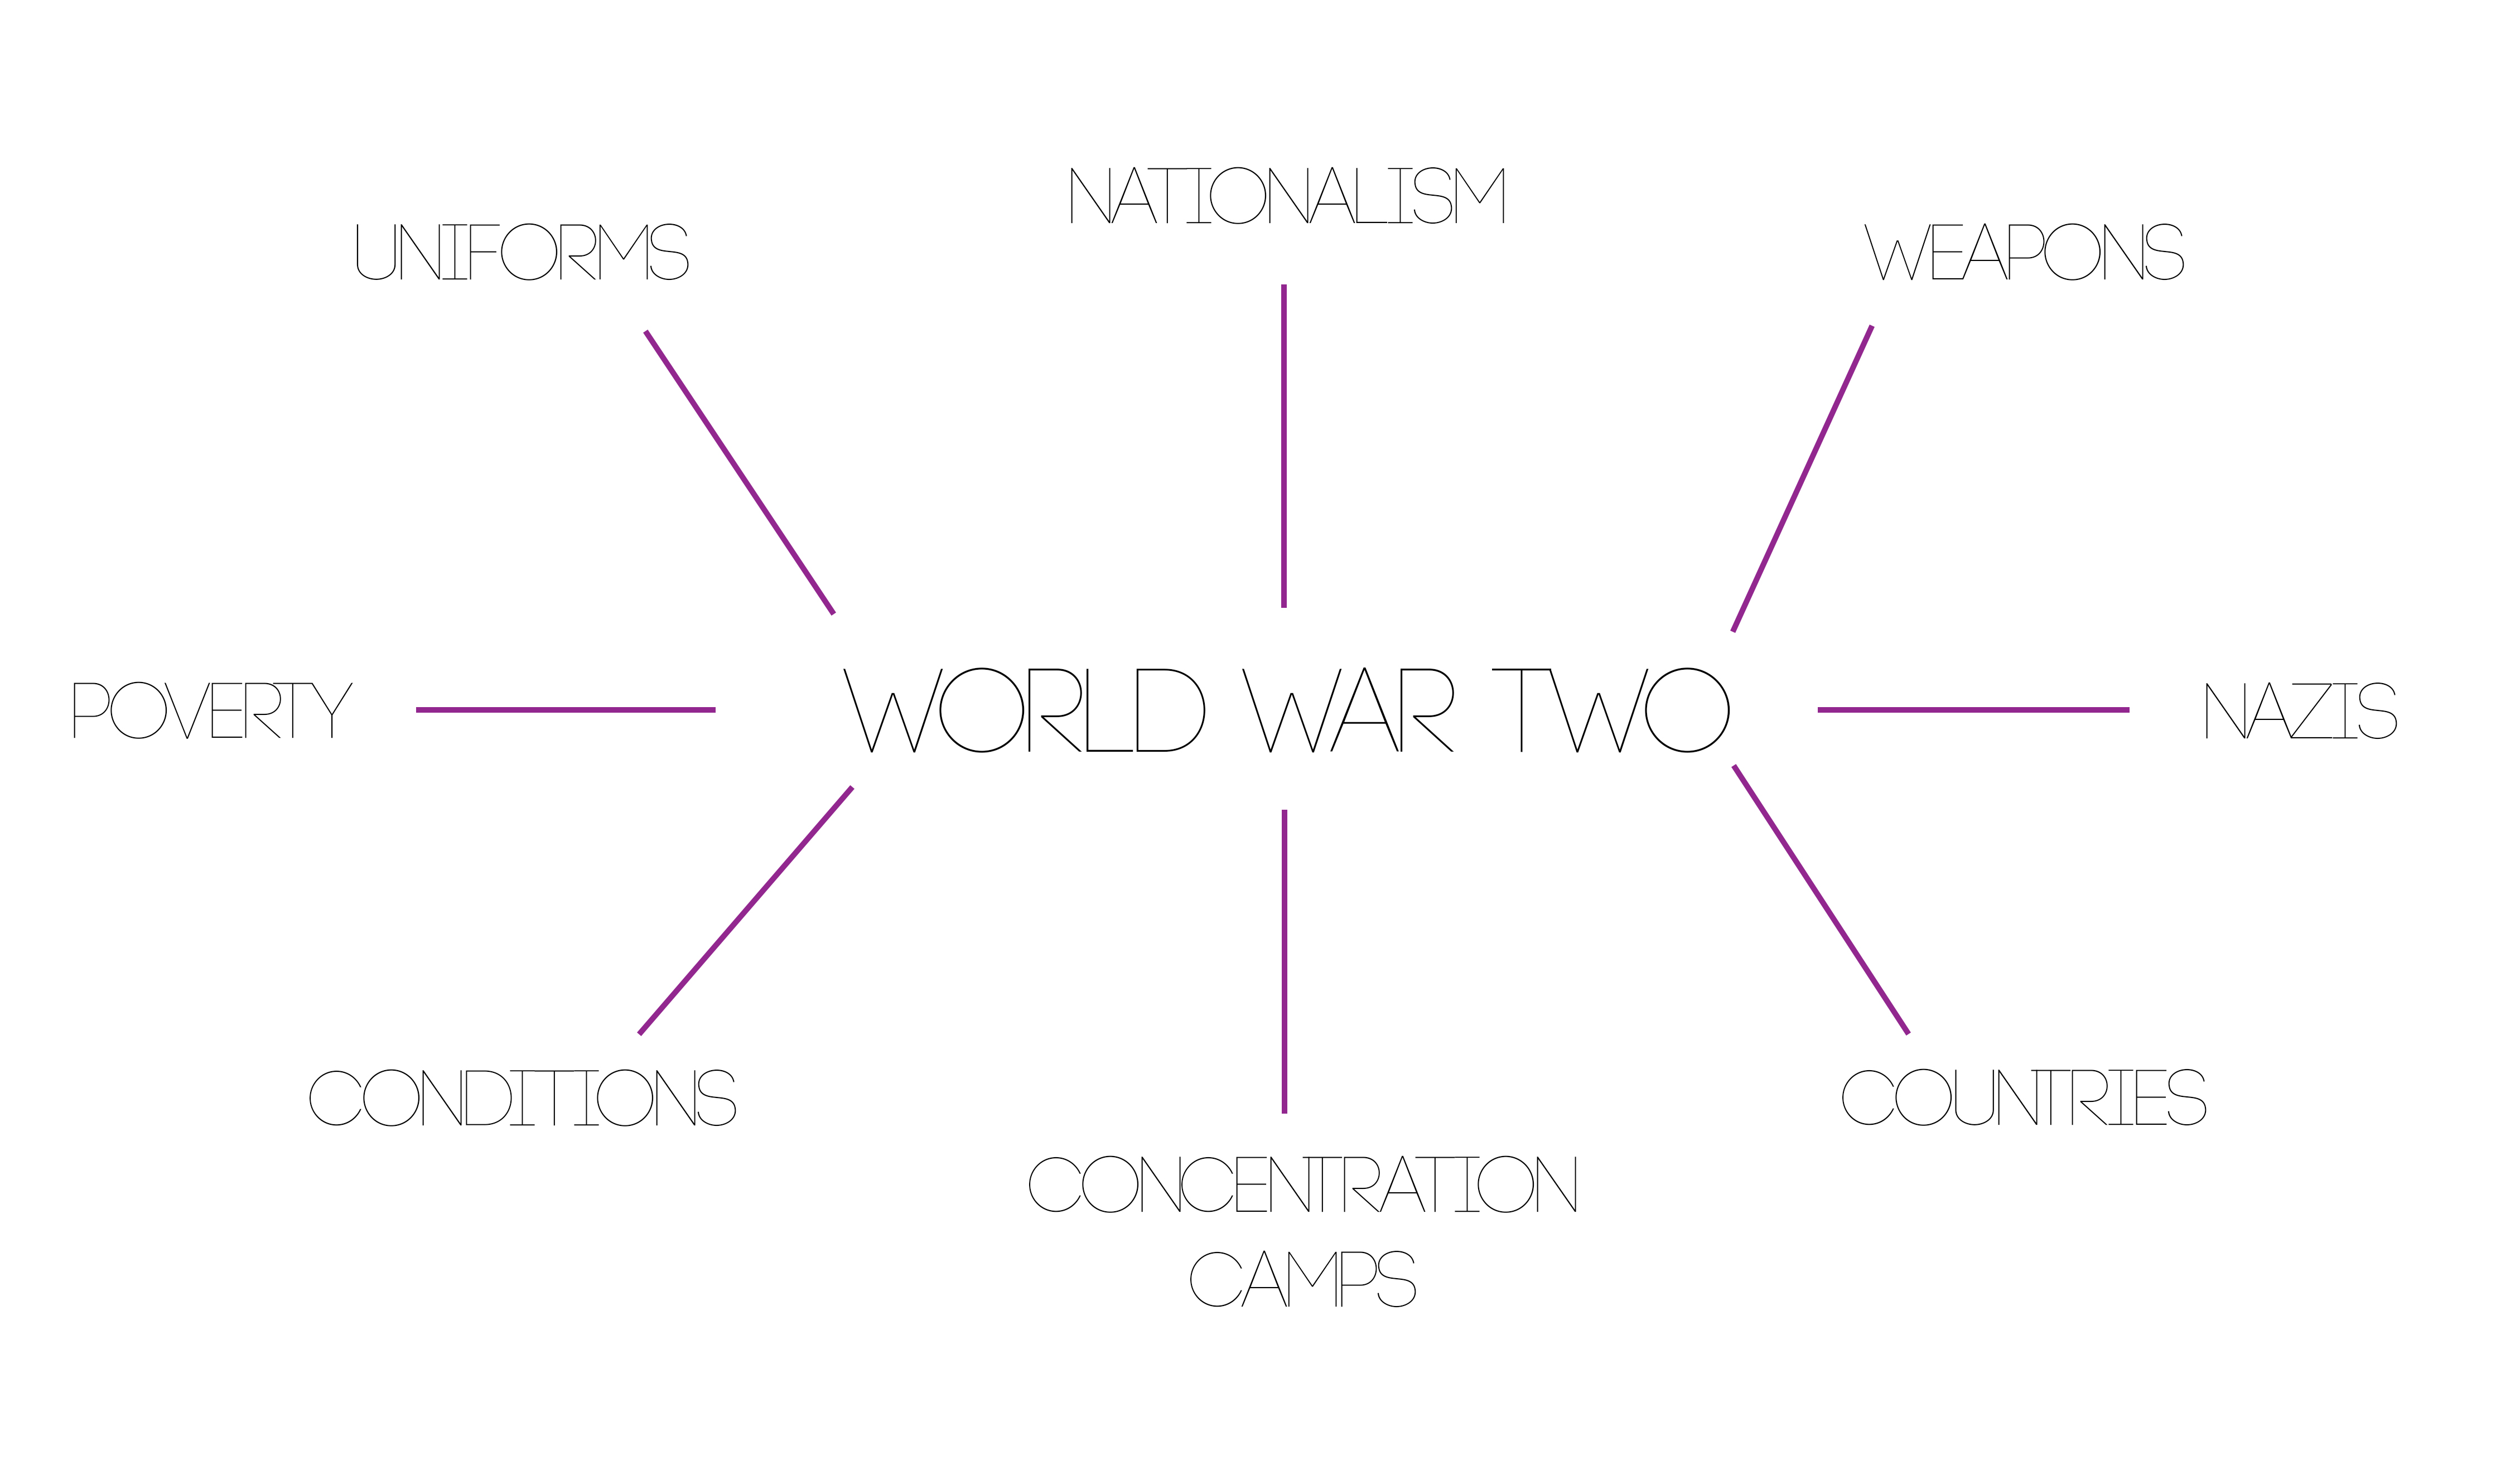 world war 2 topics to research